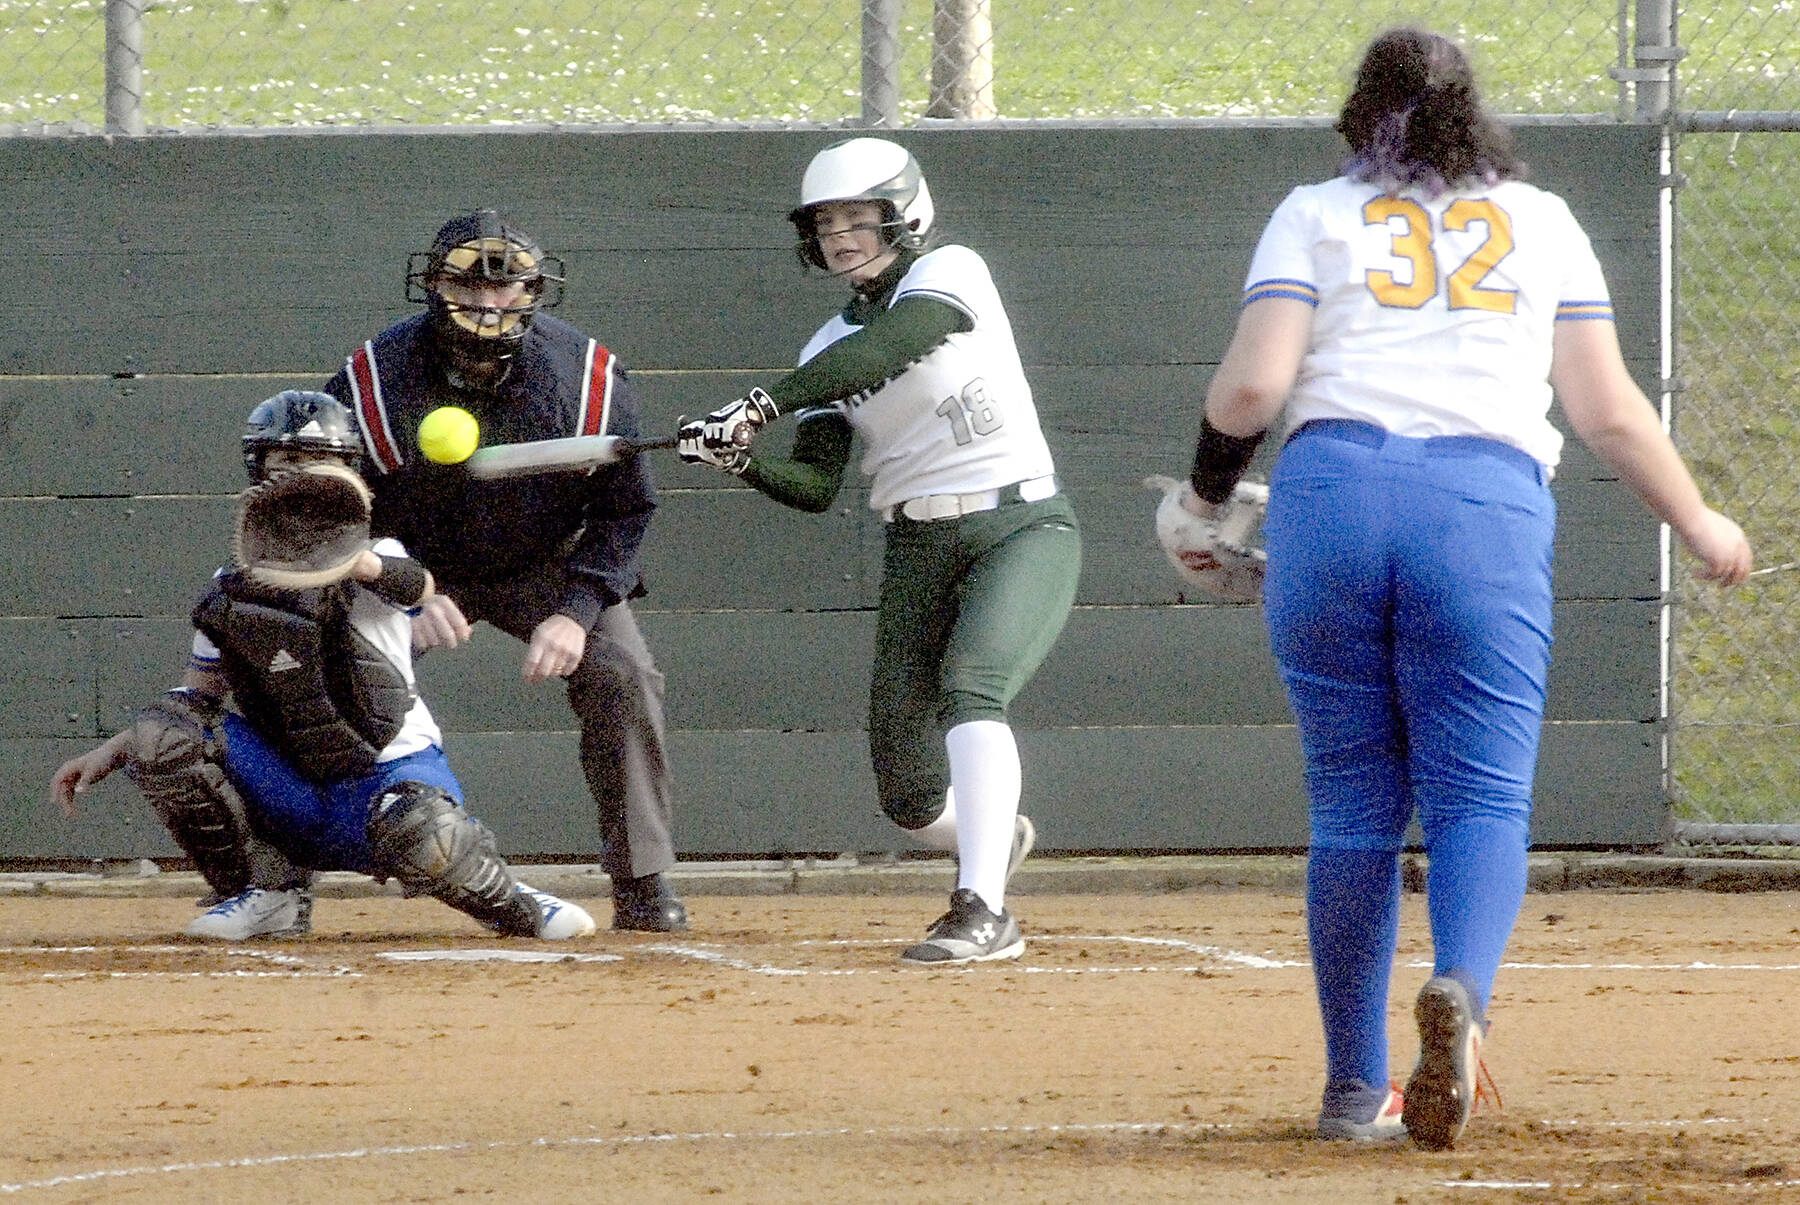 Keith Thorpe/Peninsula Daily News
Port Angeles' Lily Halberg bats in the first inning as Bremerton catcher Attianna Cabato waits for the delivery from pitcher Brooke Baker on Tuesday in Port Angeles.